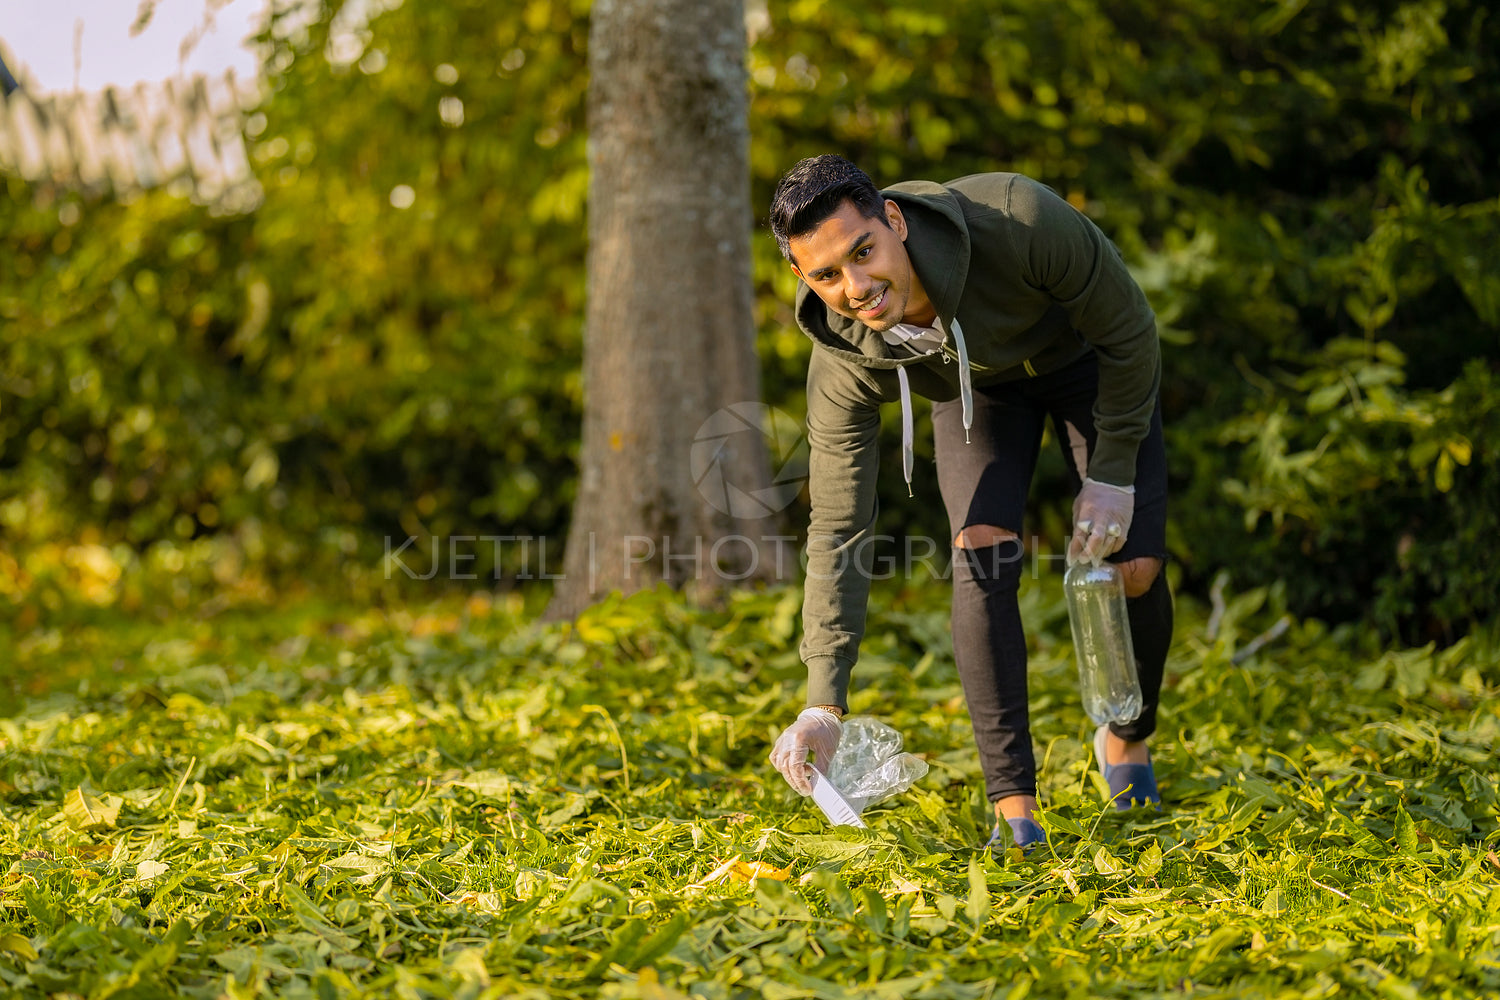 Smiling and committed volunteer cleaning garbage on grass in nature